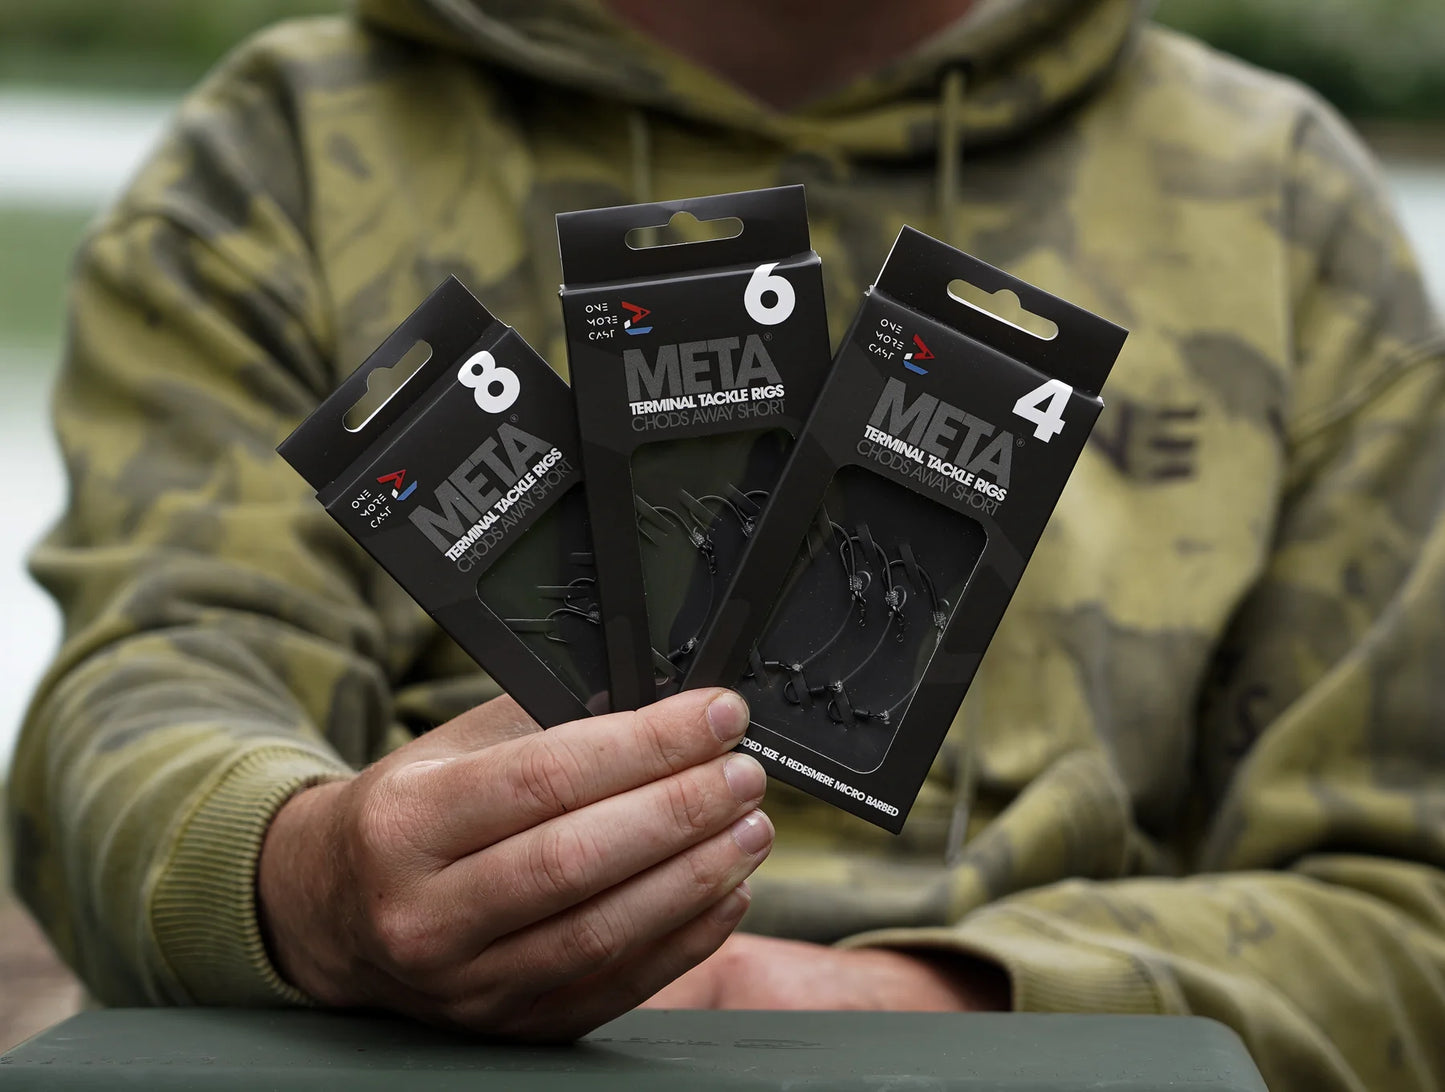 OMC OMC Chods Away x3  - Parkfield Angling Centre